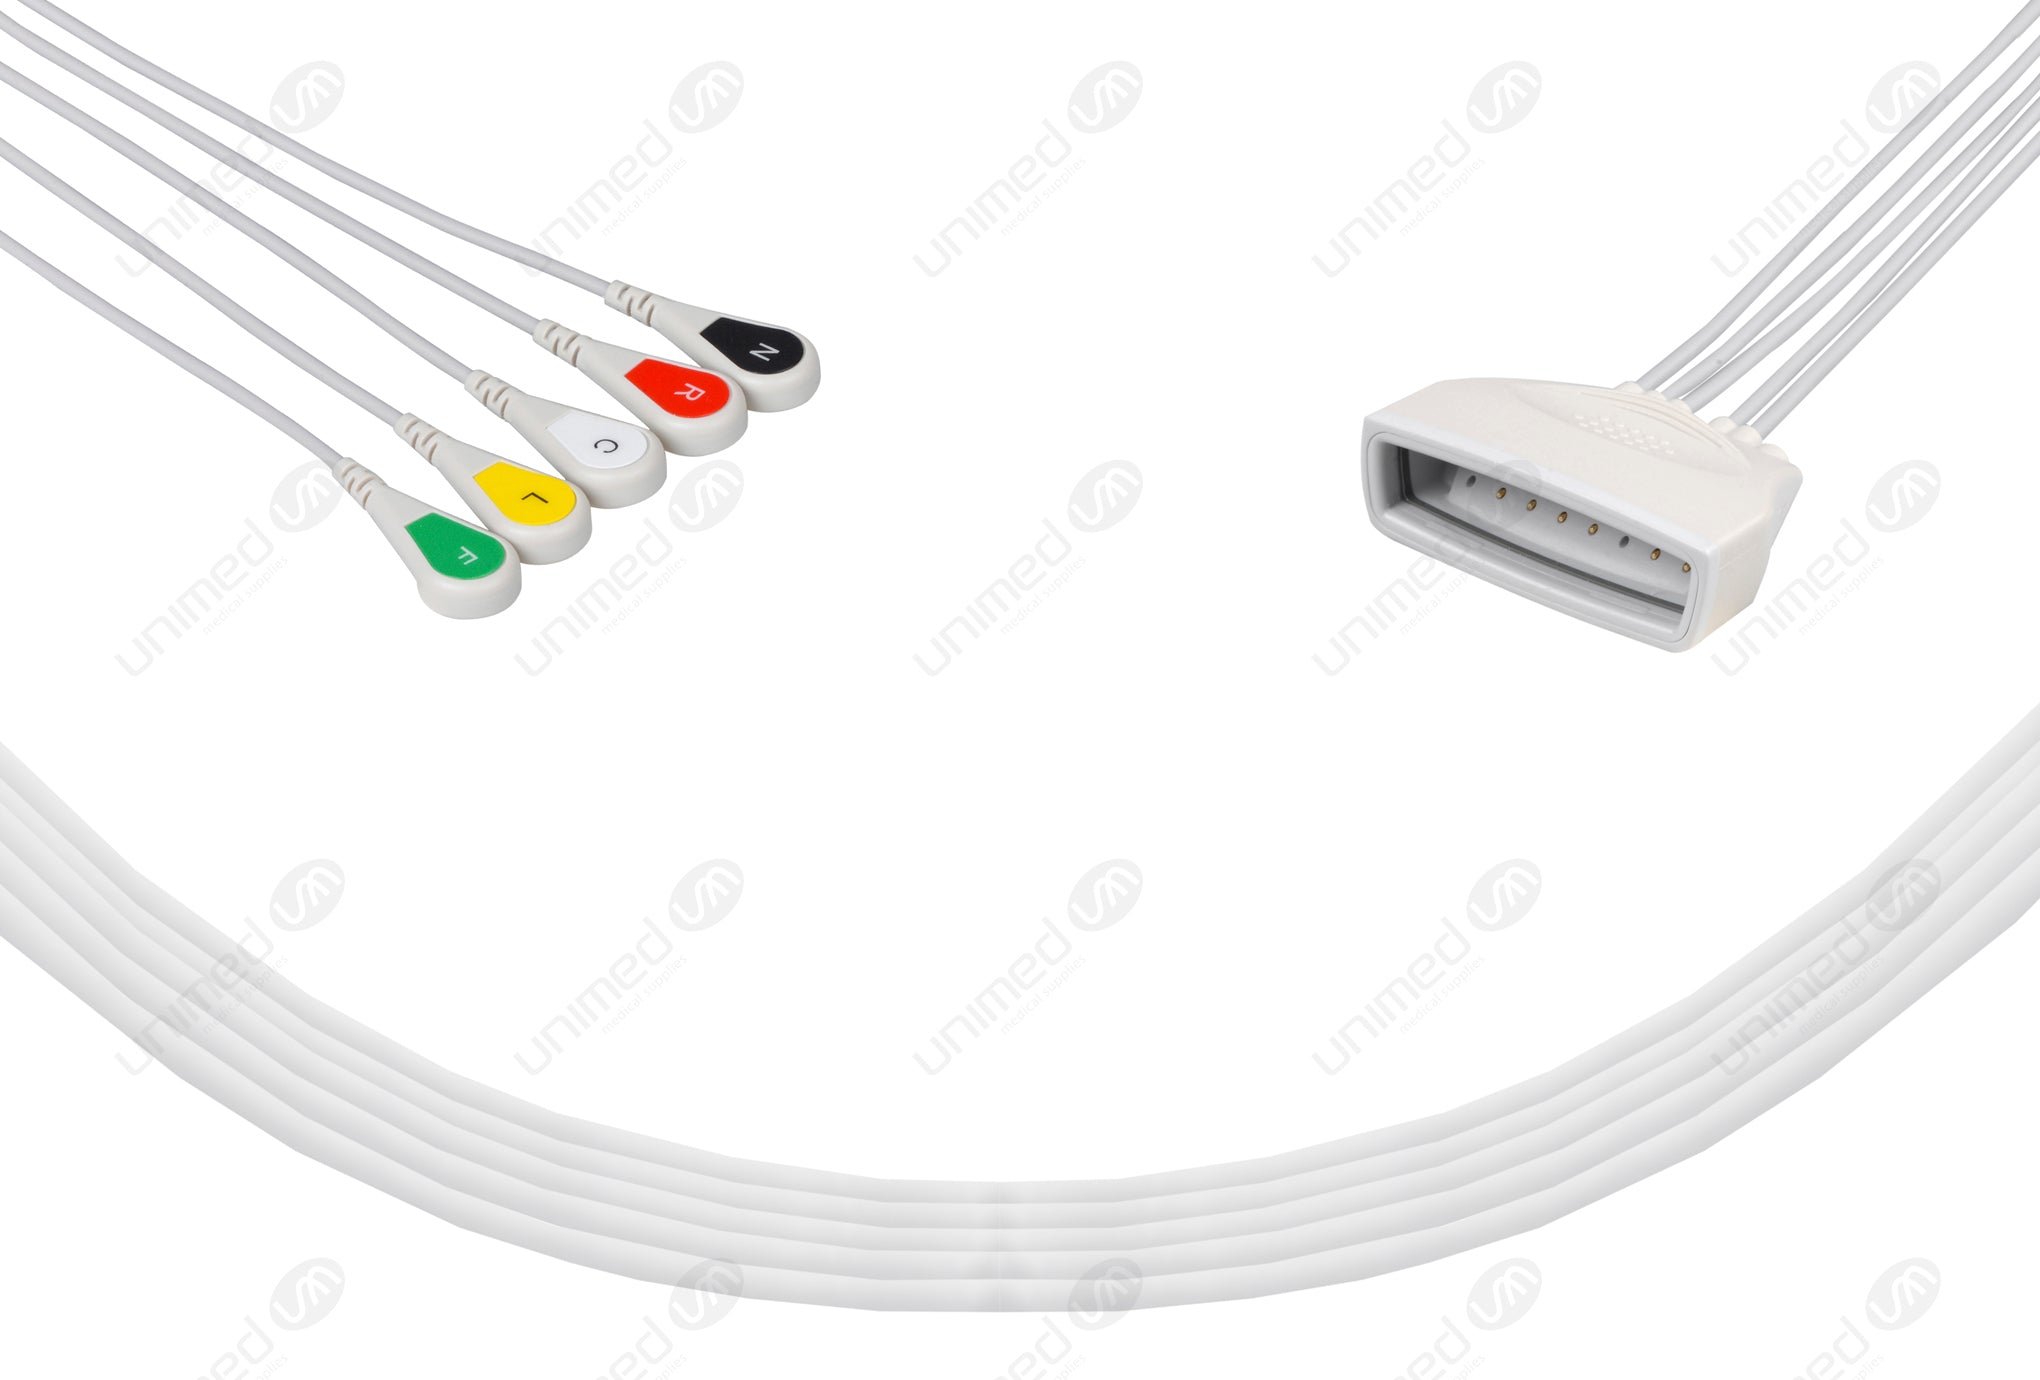 Philips MX40 5 Leads Snap Compatible Reusable ECG Lead Wires